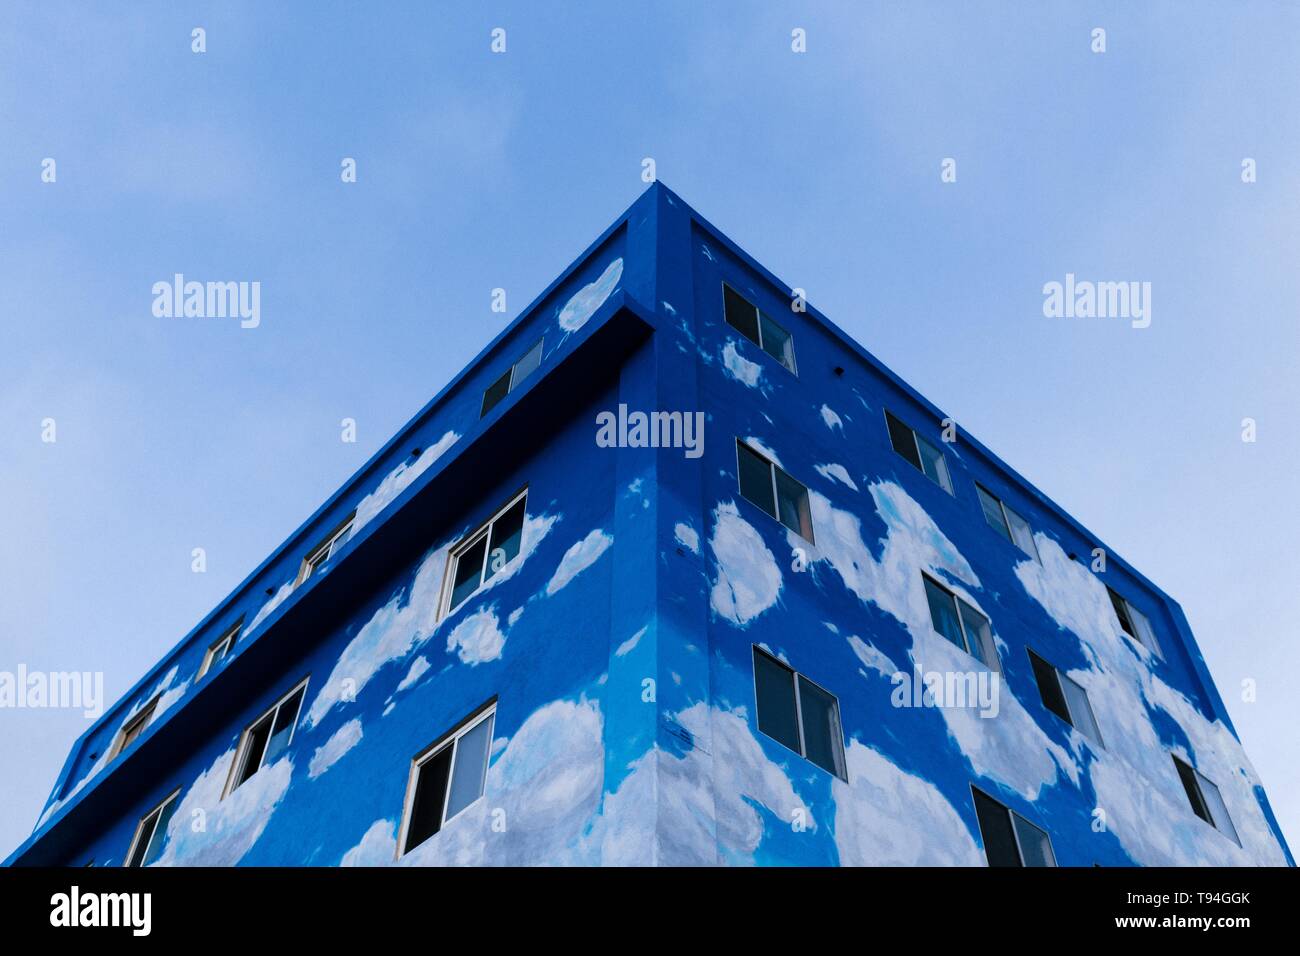 Half-finished blue building shot from a low angle Stock Photo